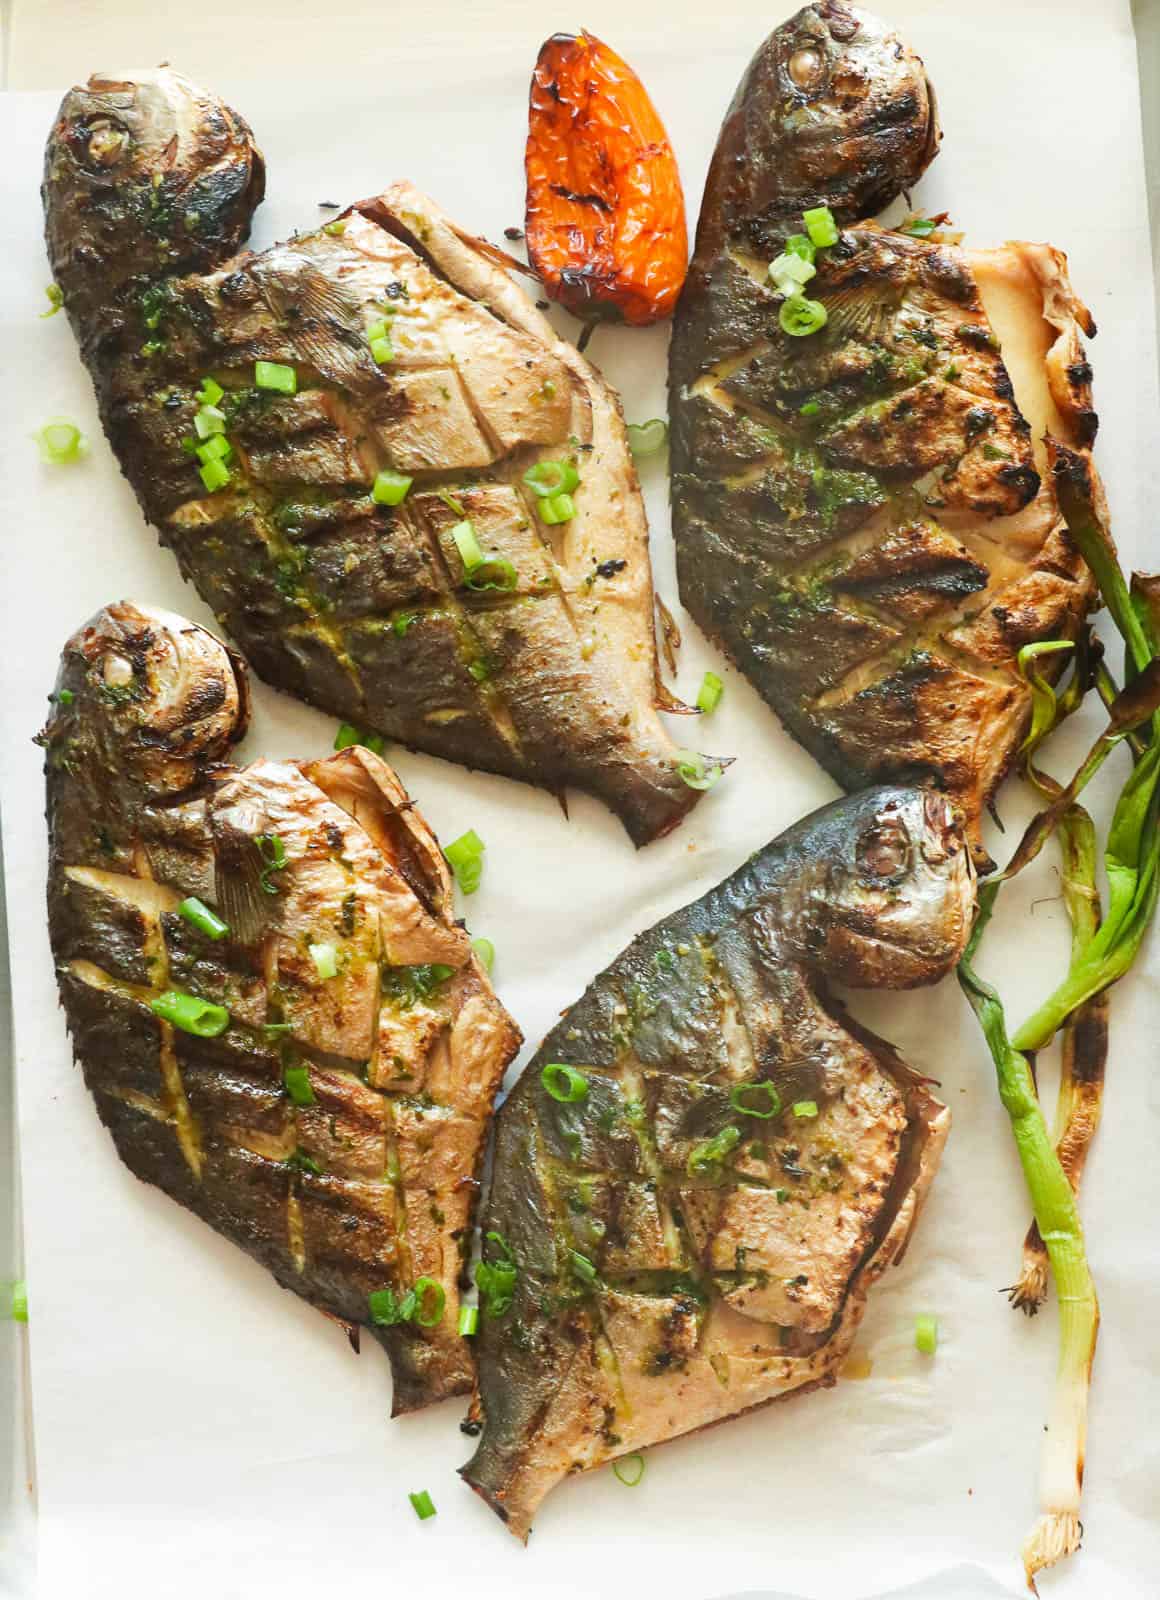 Grilled Pompano Fish garnished with sliced green onions.